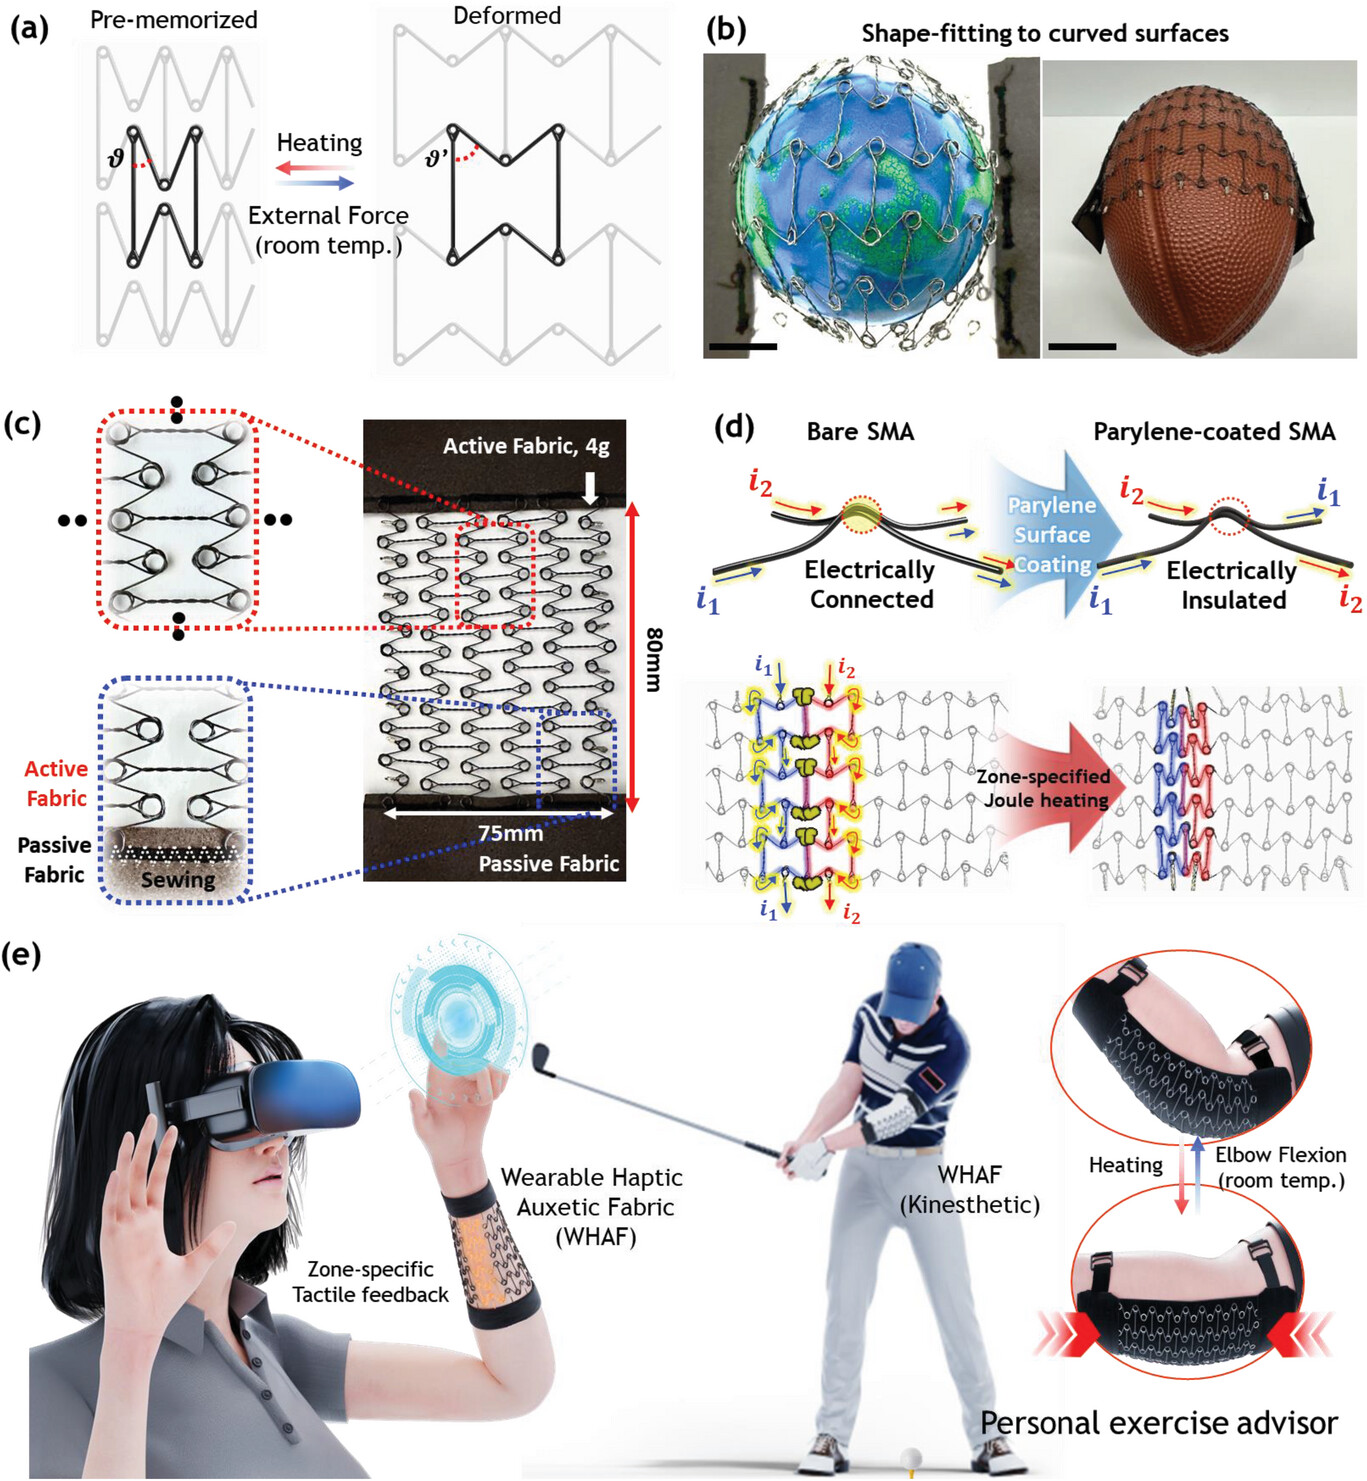 Schematic of fabricating wearable haptic auxetic fabric and its structural properties